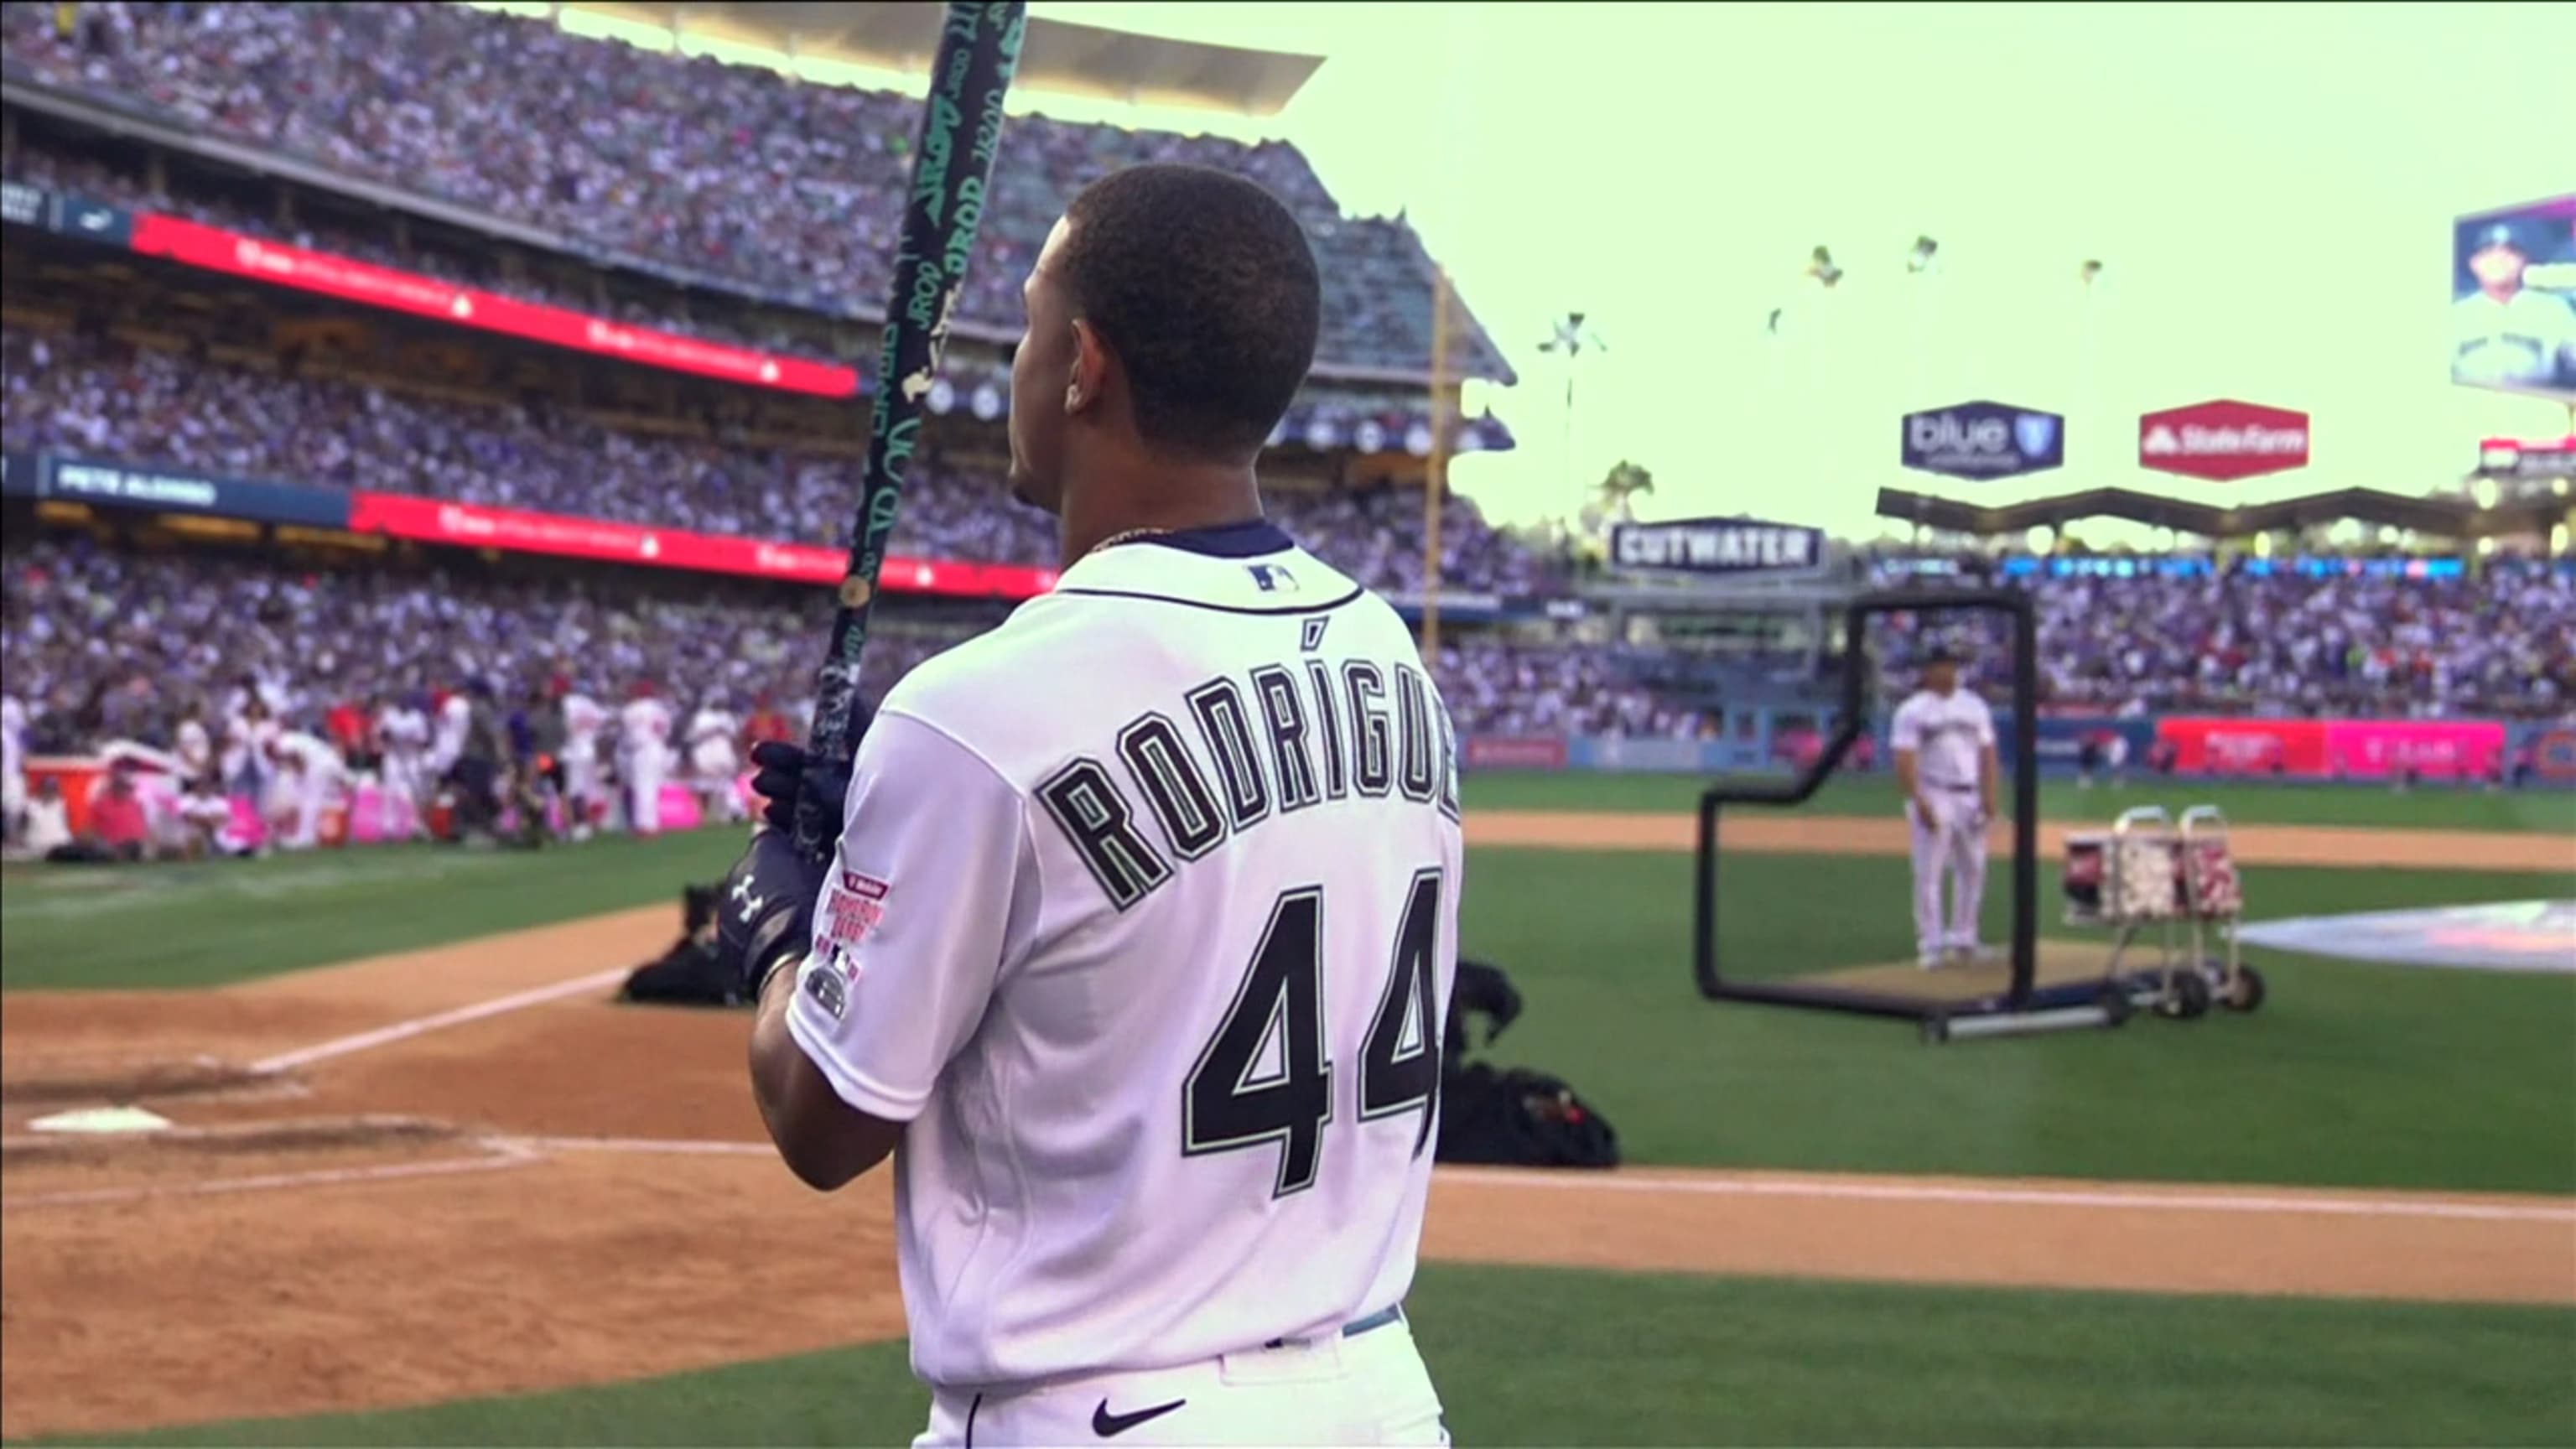 Julio Rodriguez puts on show at 2022 Home Run Derby